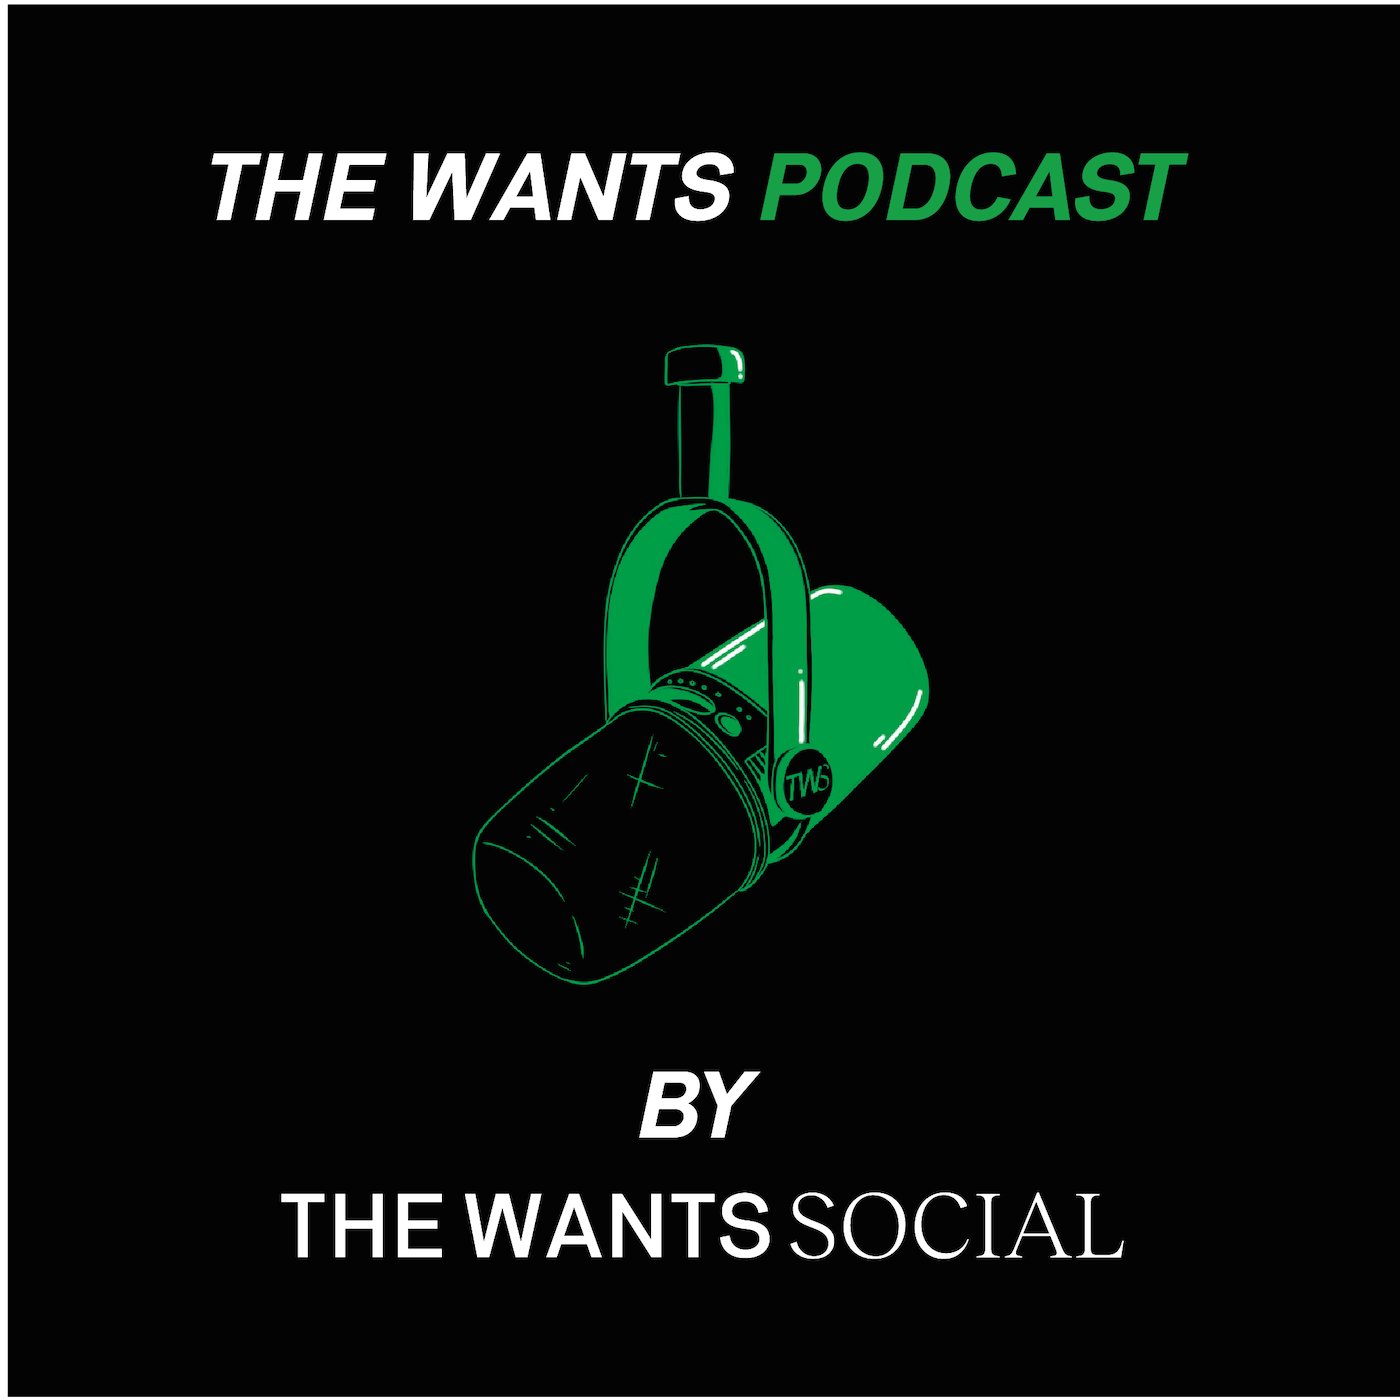 THE WANTS PODCAST